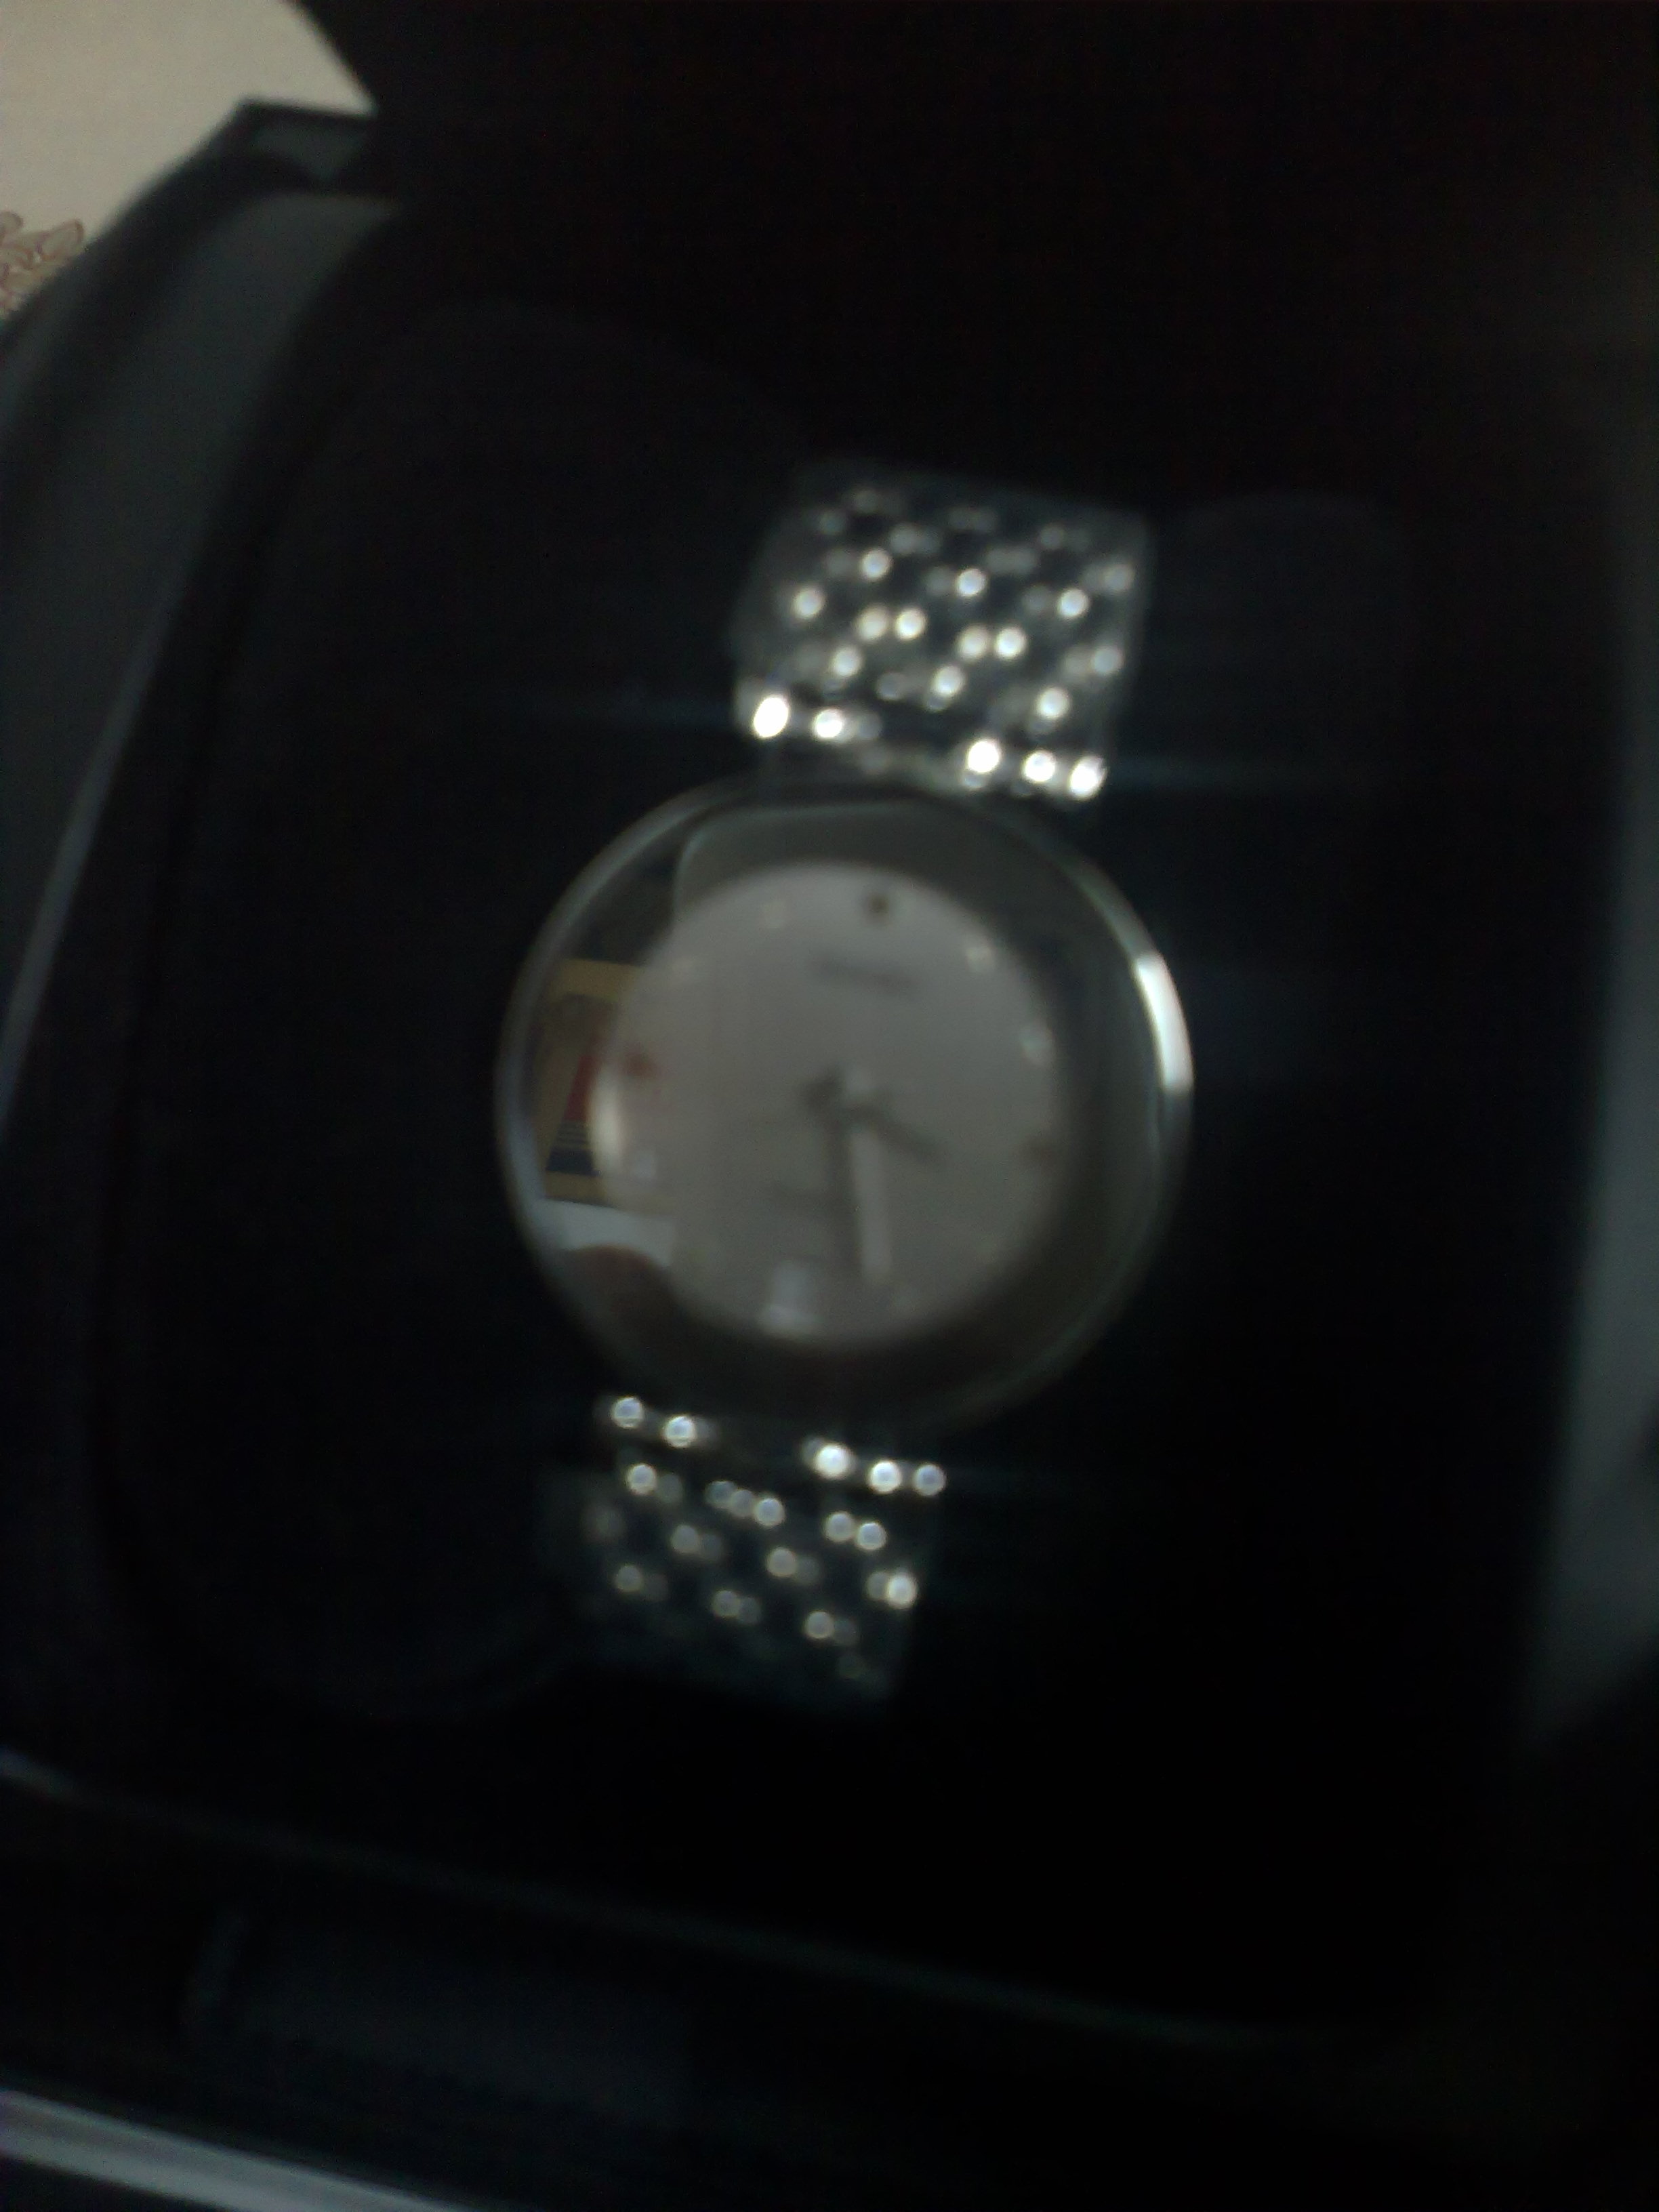 A new Rado Watch for sale.... Money is urjent...... large image 1